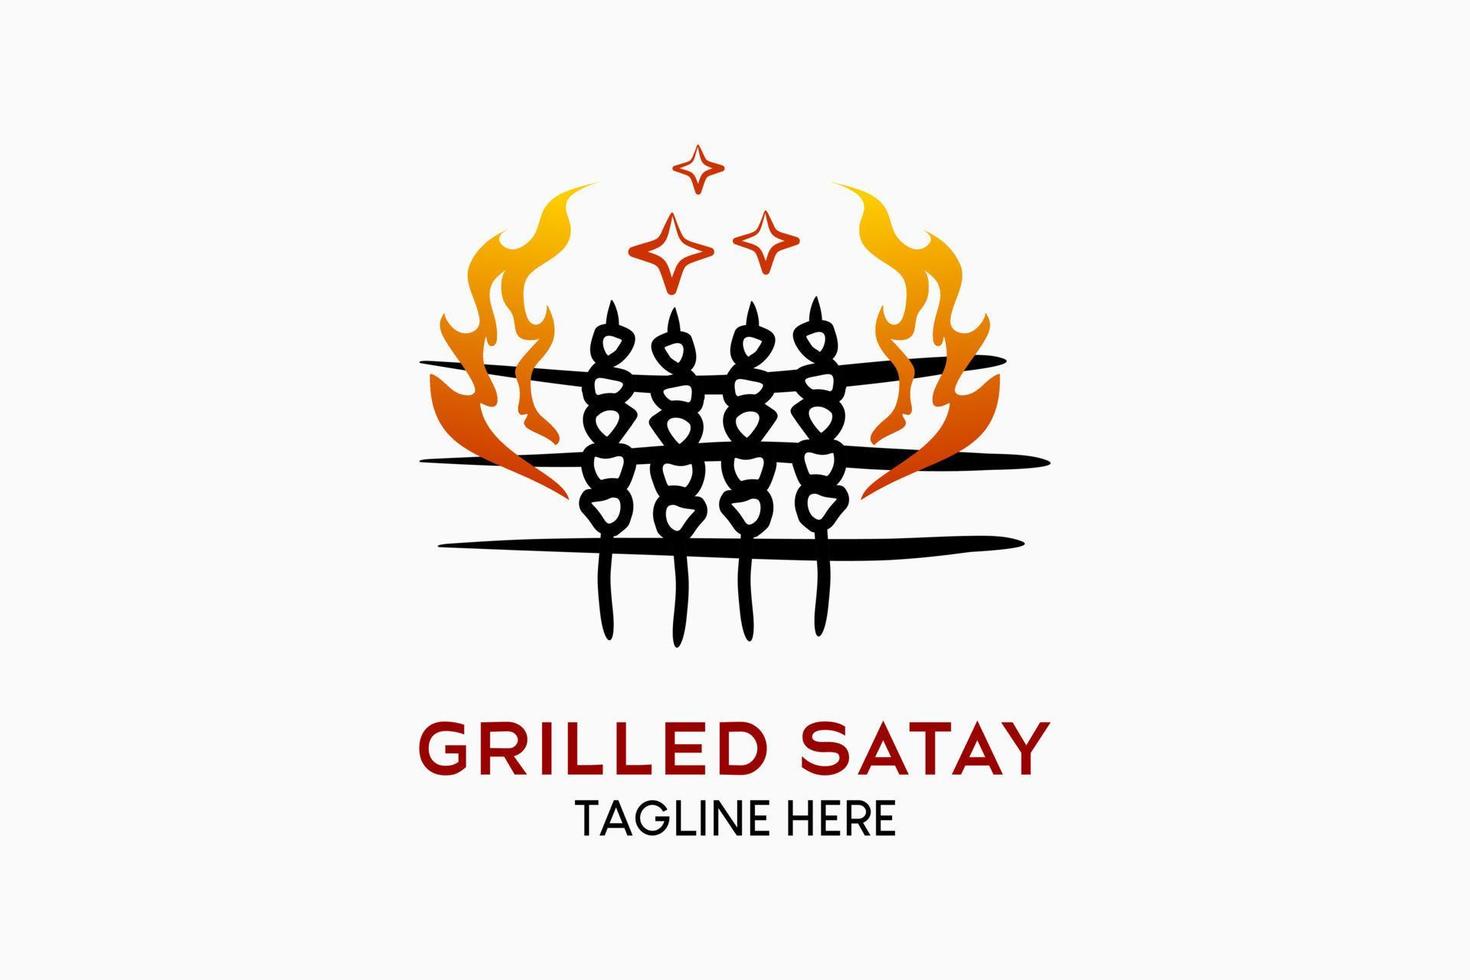 Grilled satay logo design with hand drawn creative concept. The satay icon blends with the fire icon. Grilled meat logo illustration vector